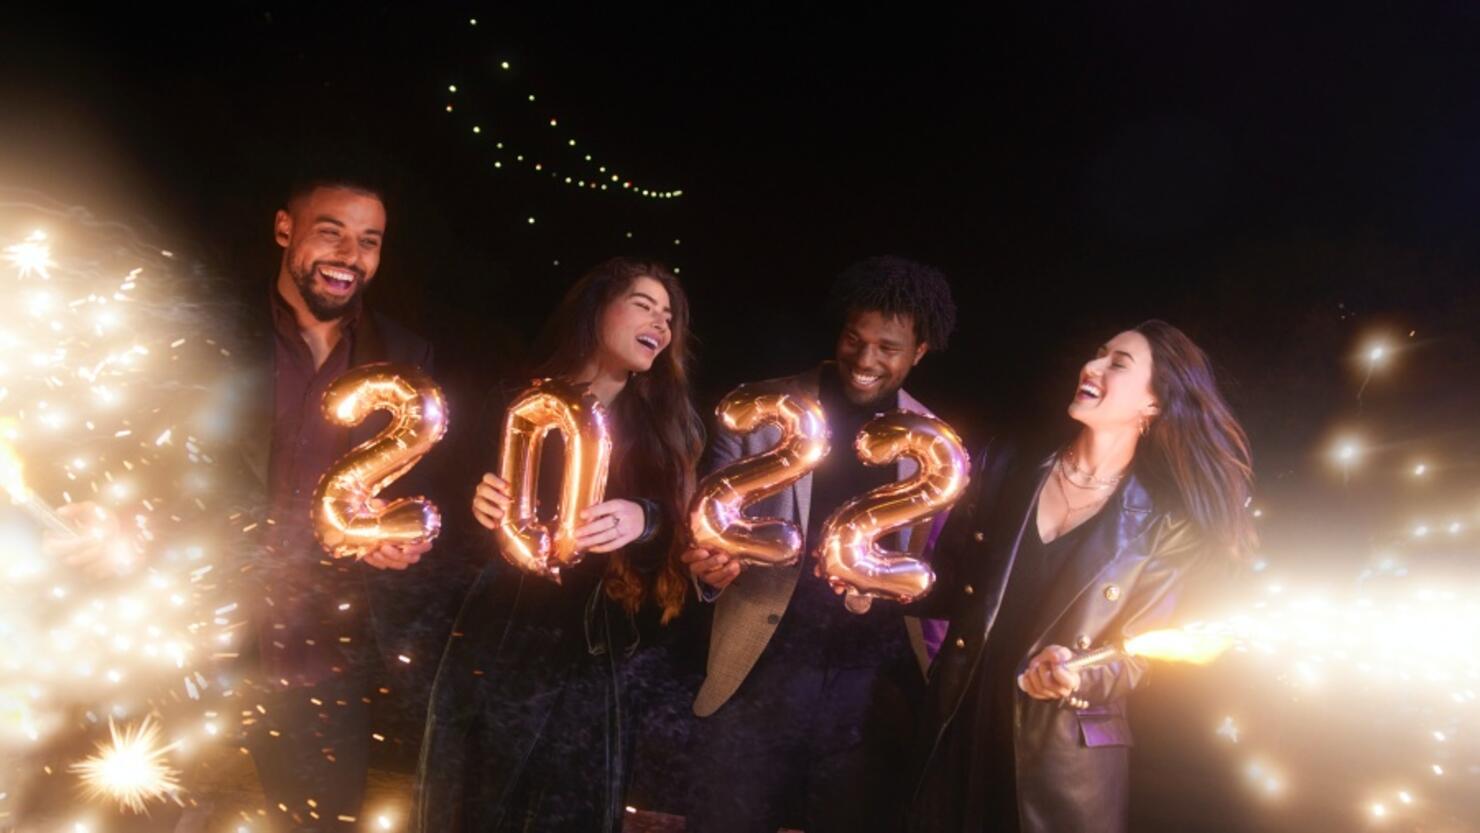 Group of friends celebrating new years holding 2022 balloons and sparklers